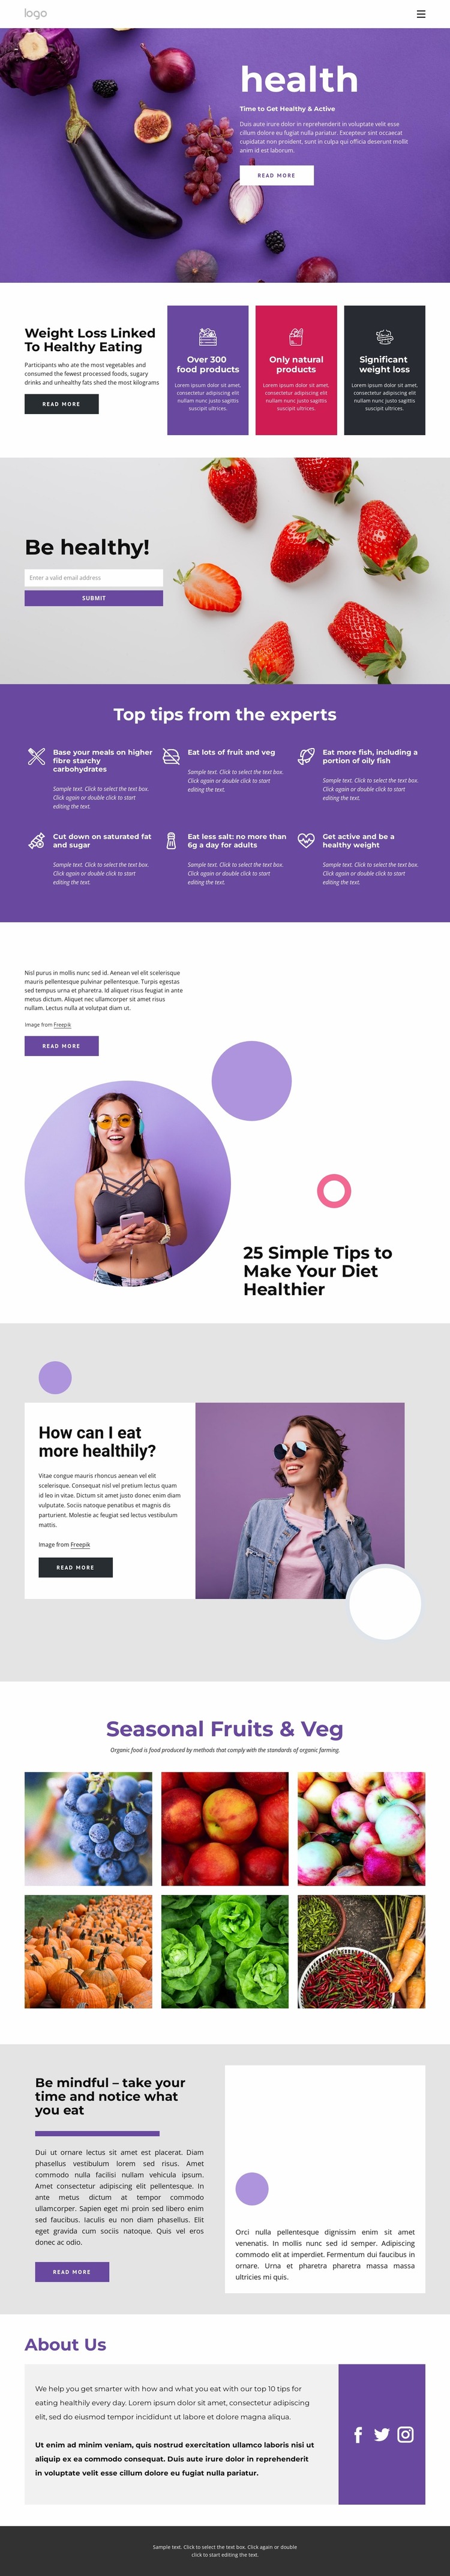 Building a healthy and balanced diet Website Mockup